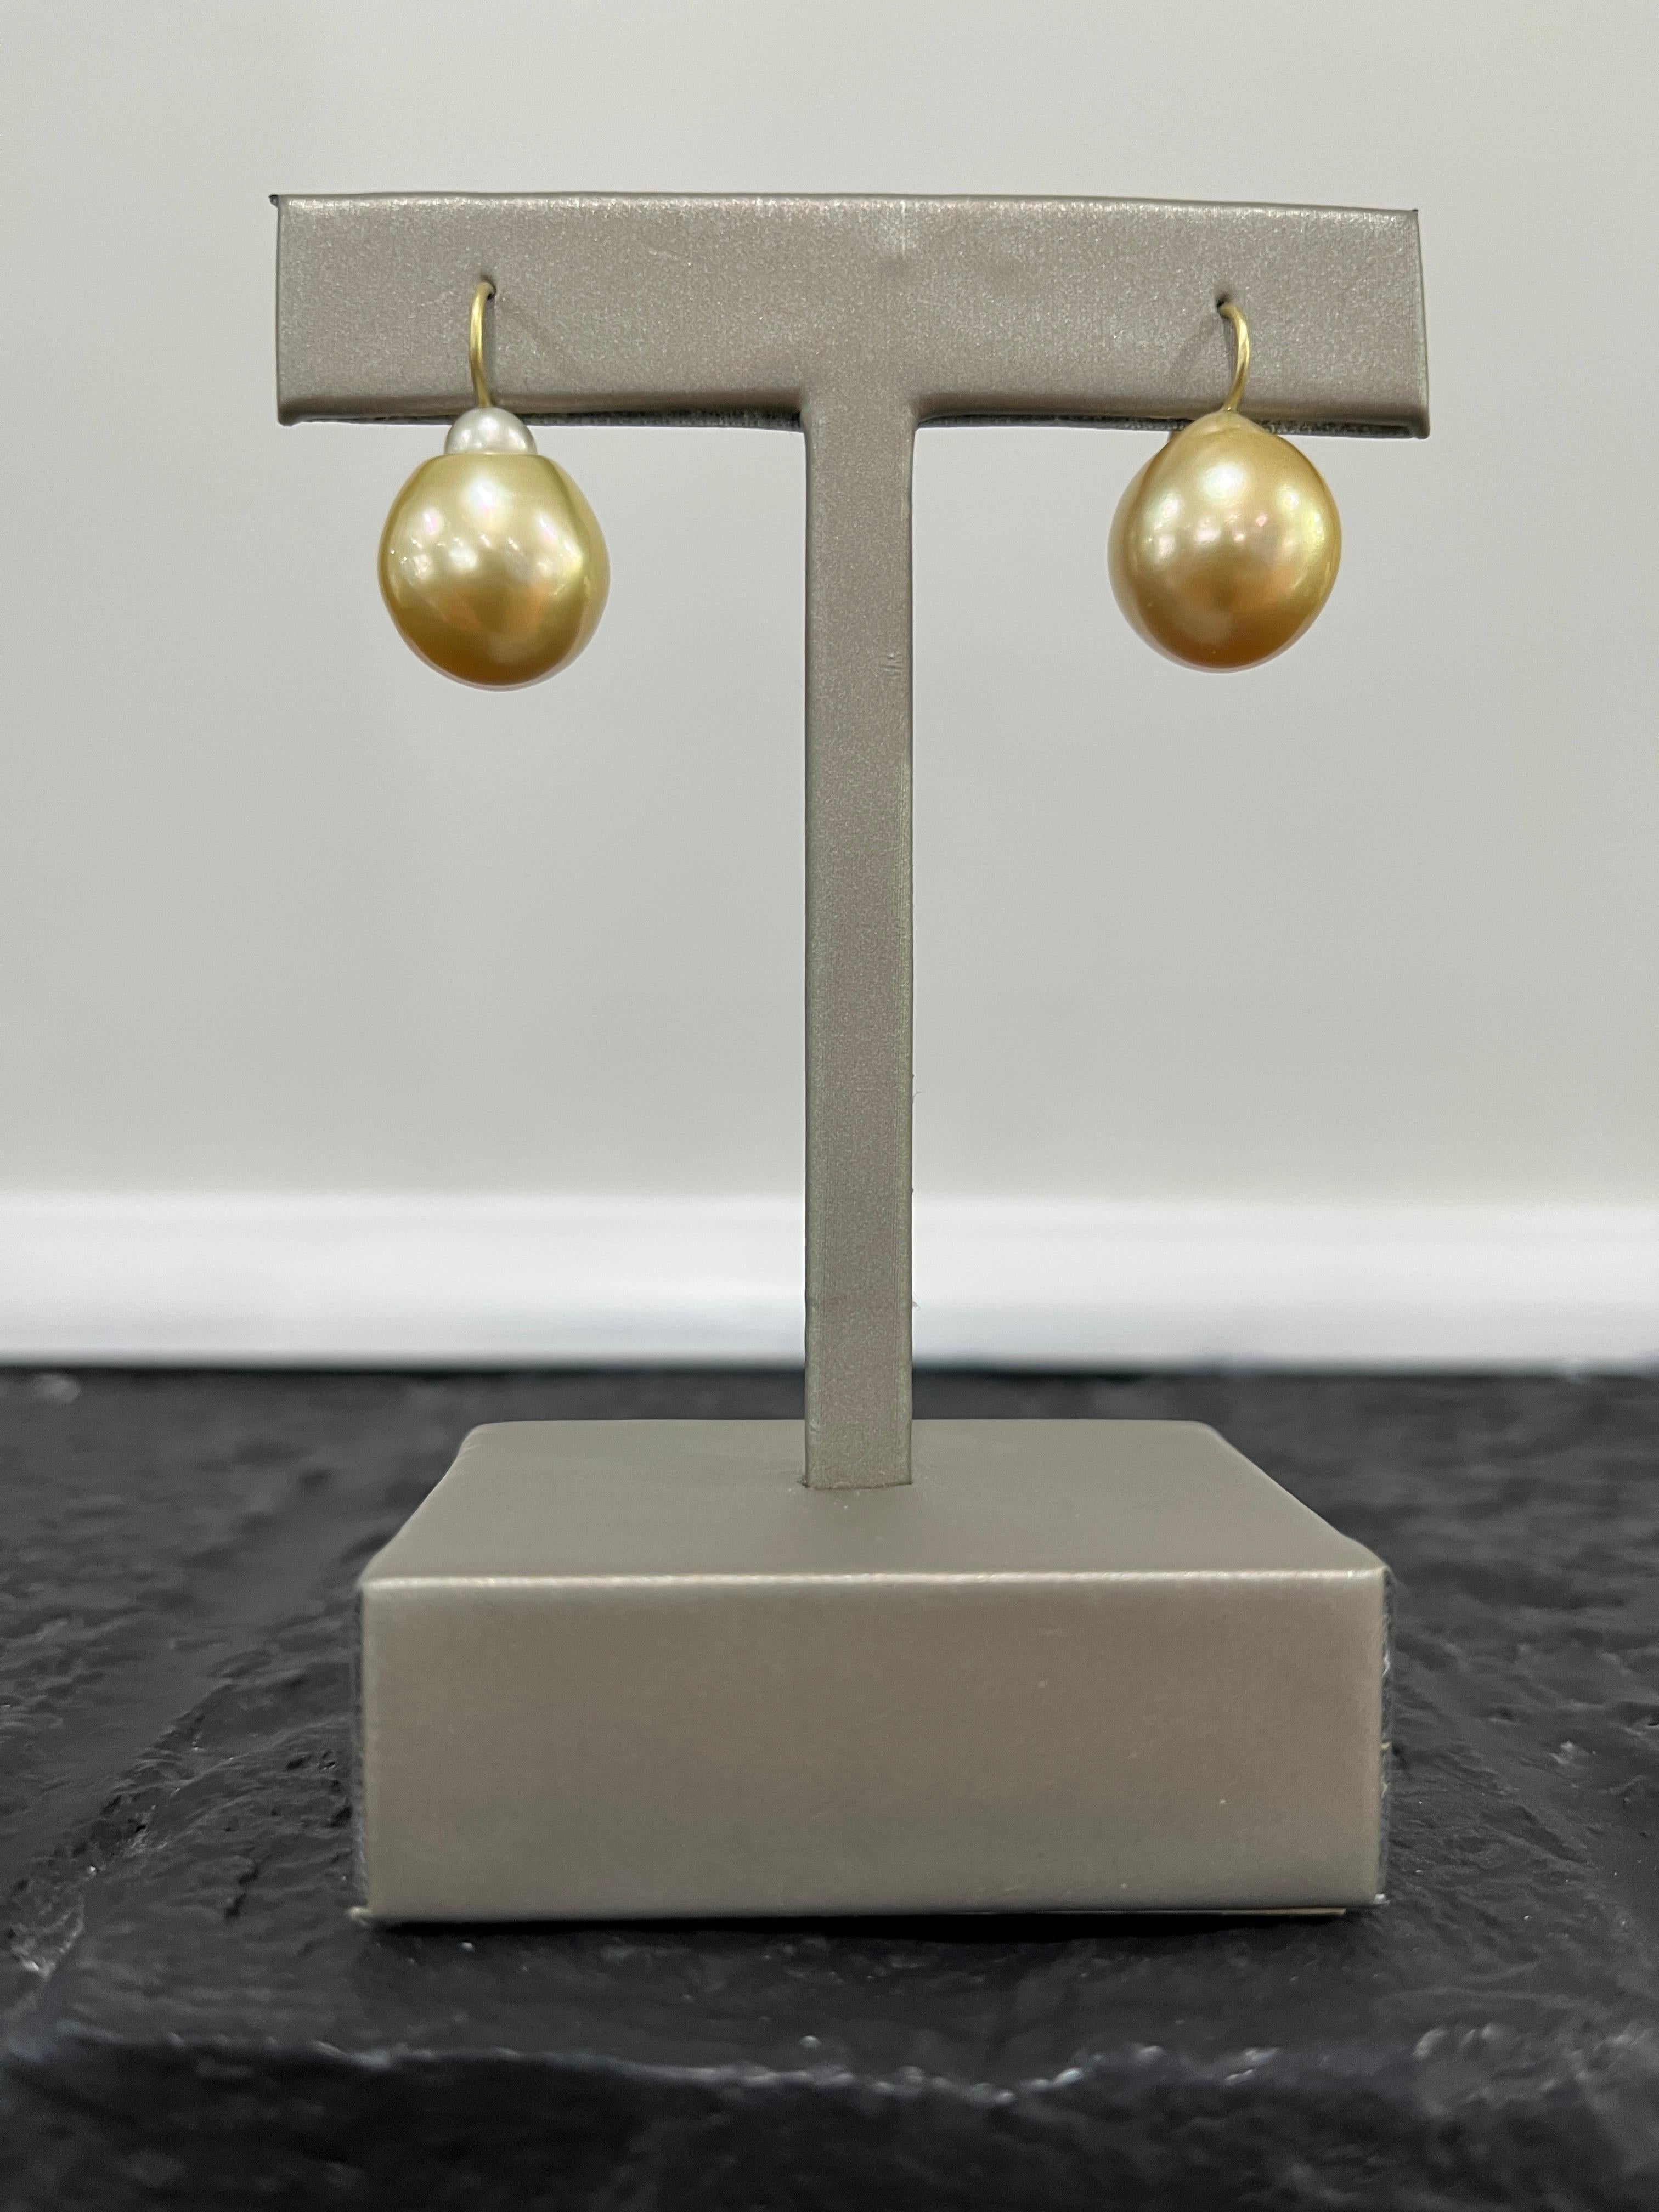 Classic, timeless, and simply chic, Faye Kim's lustrous 18 Karat Gold Golden Baroque South Sea Pearl Drop Earrings are finished with 18 Karat Gold ear wires. These earrings will never go out of style, look beautiful against the skin and can be